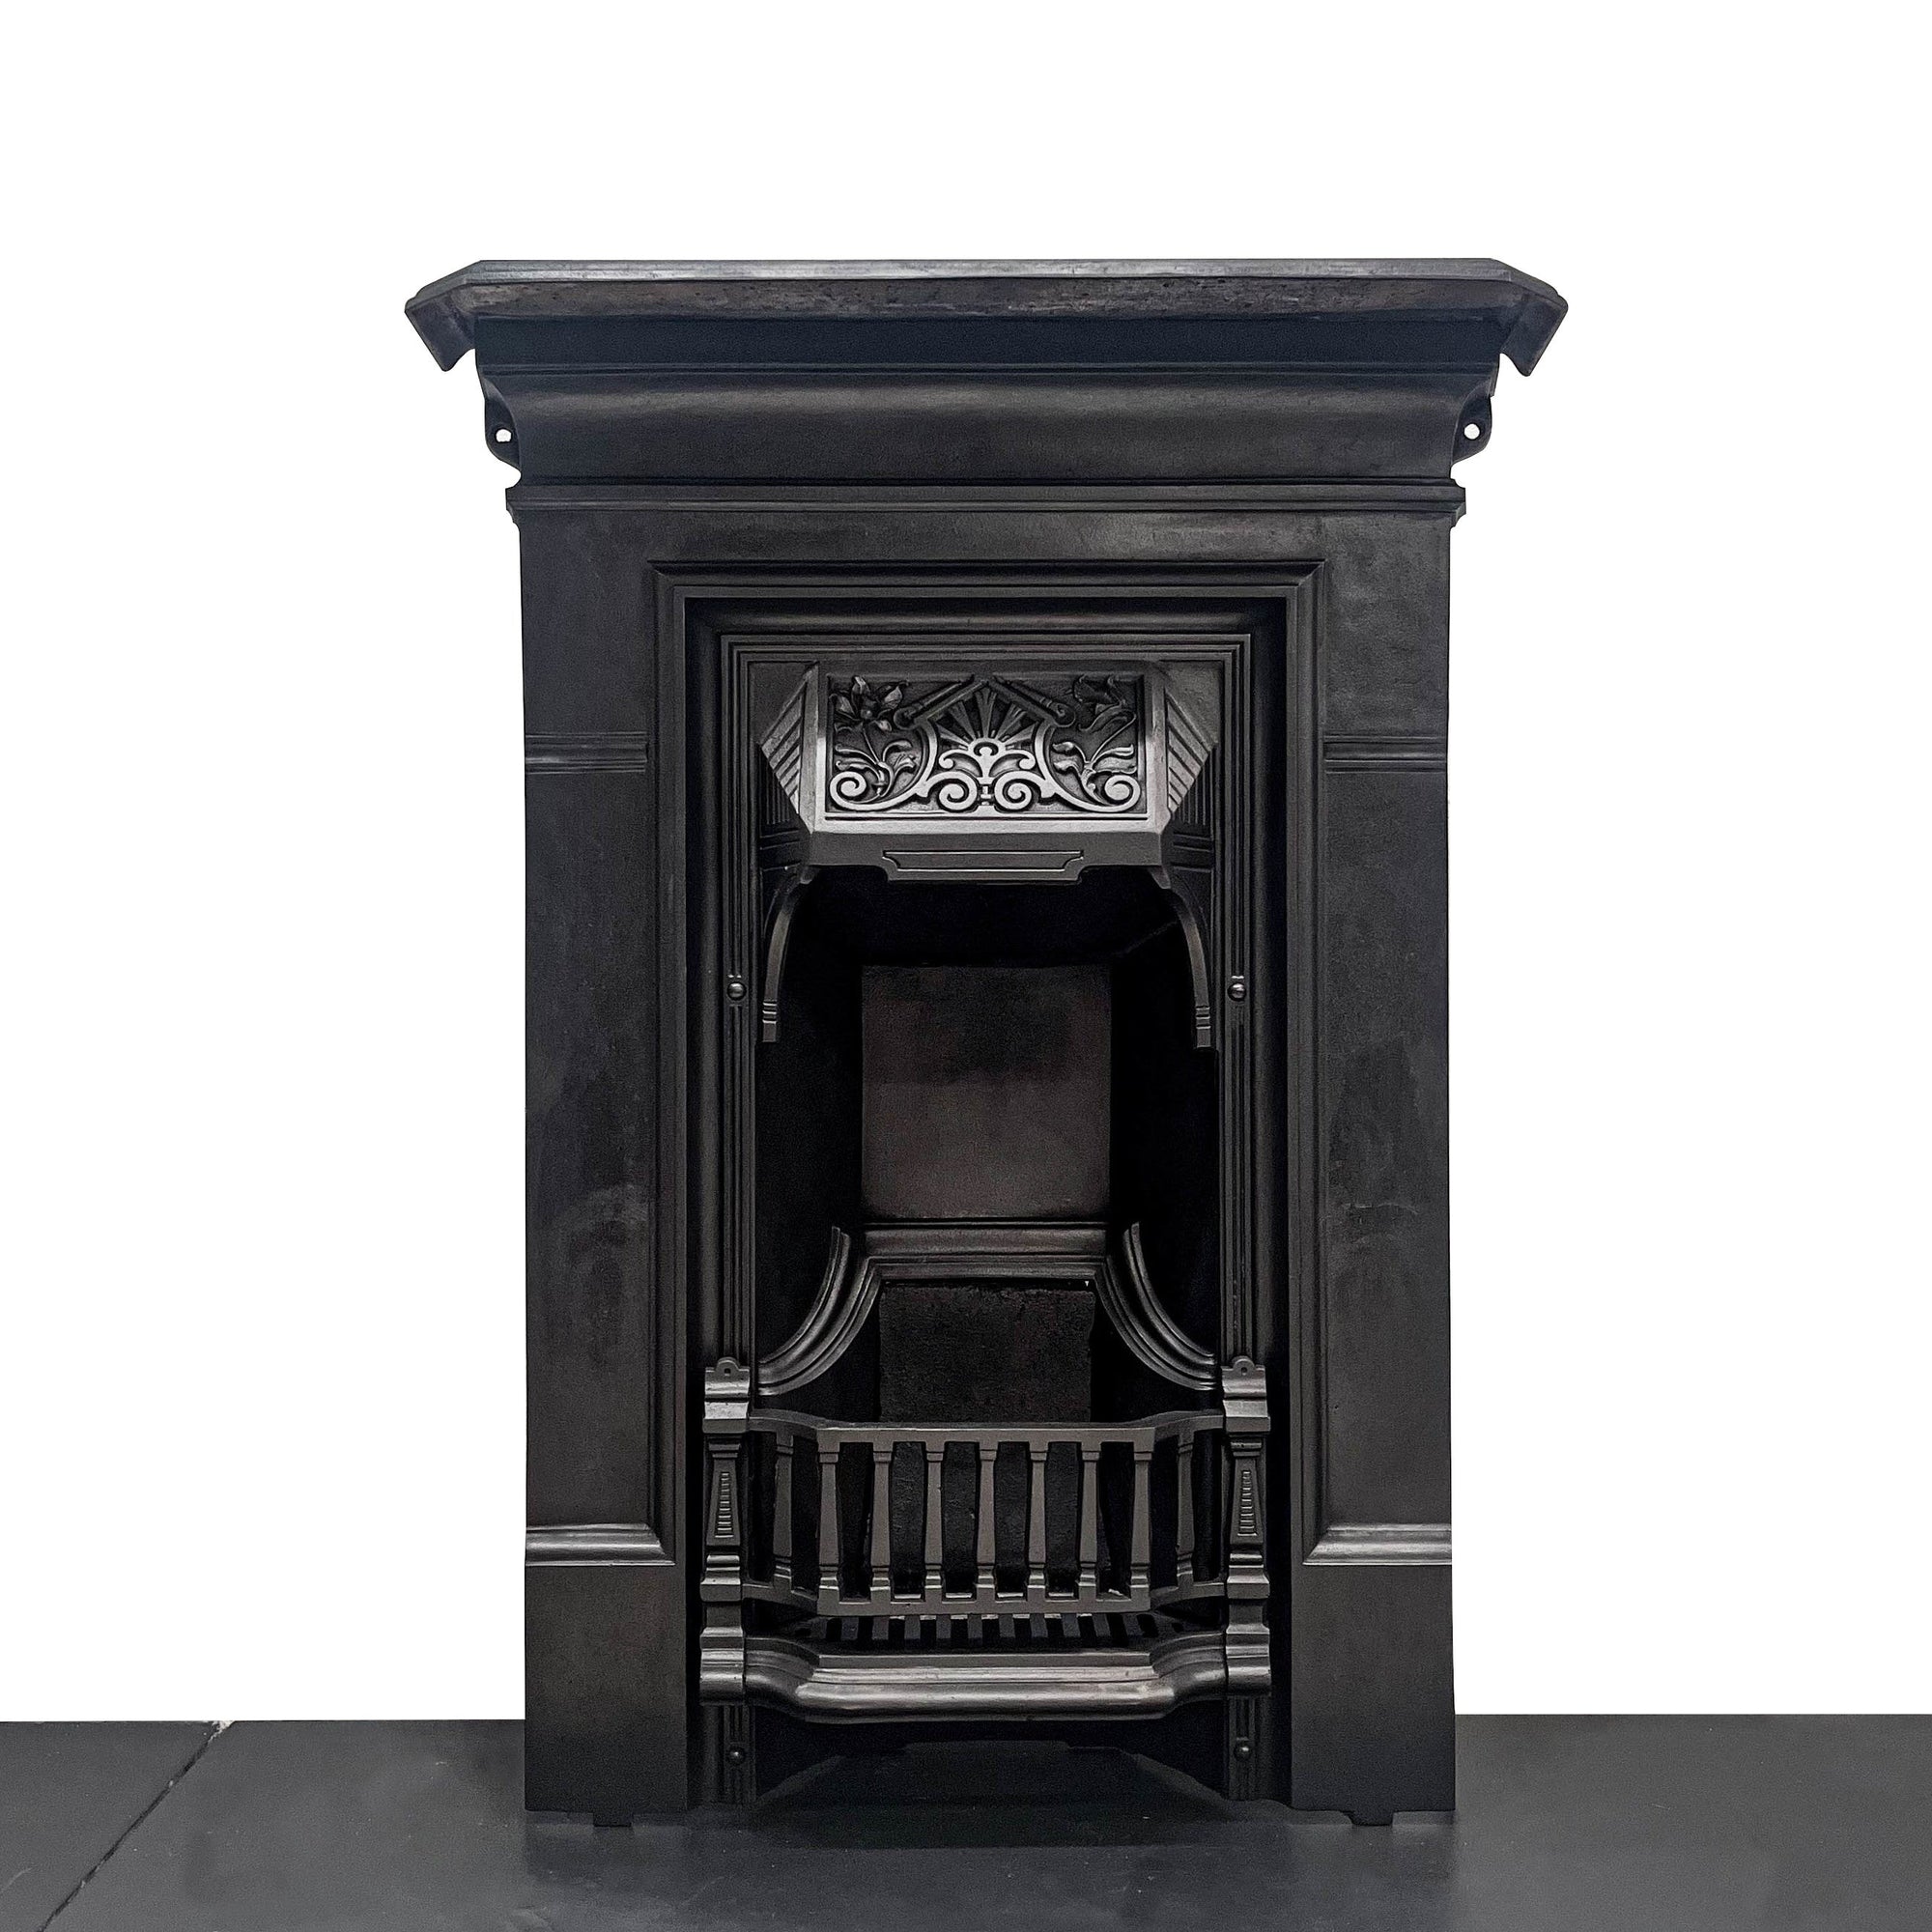 Combination Fireplaces